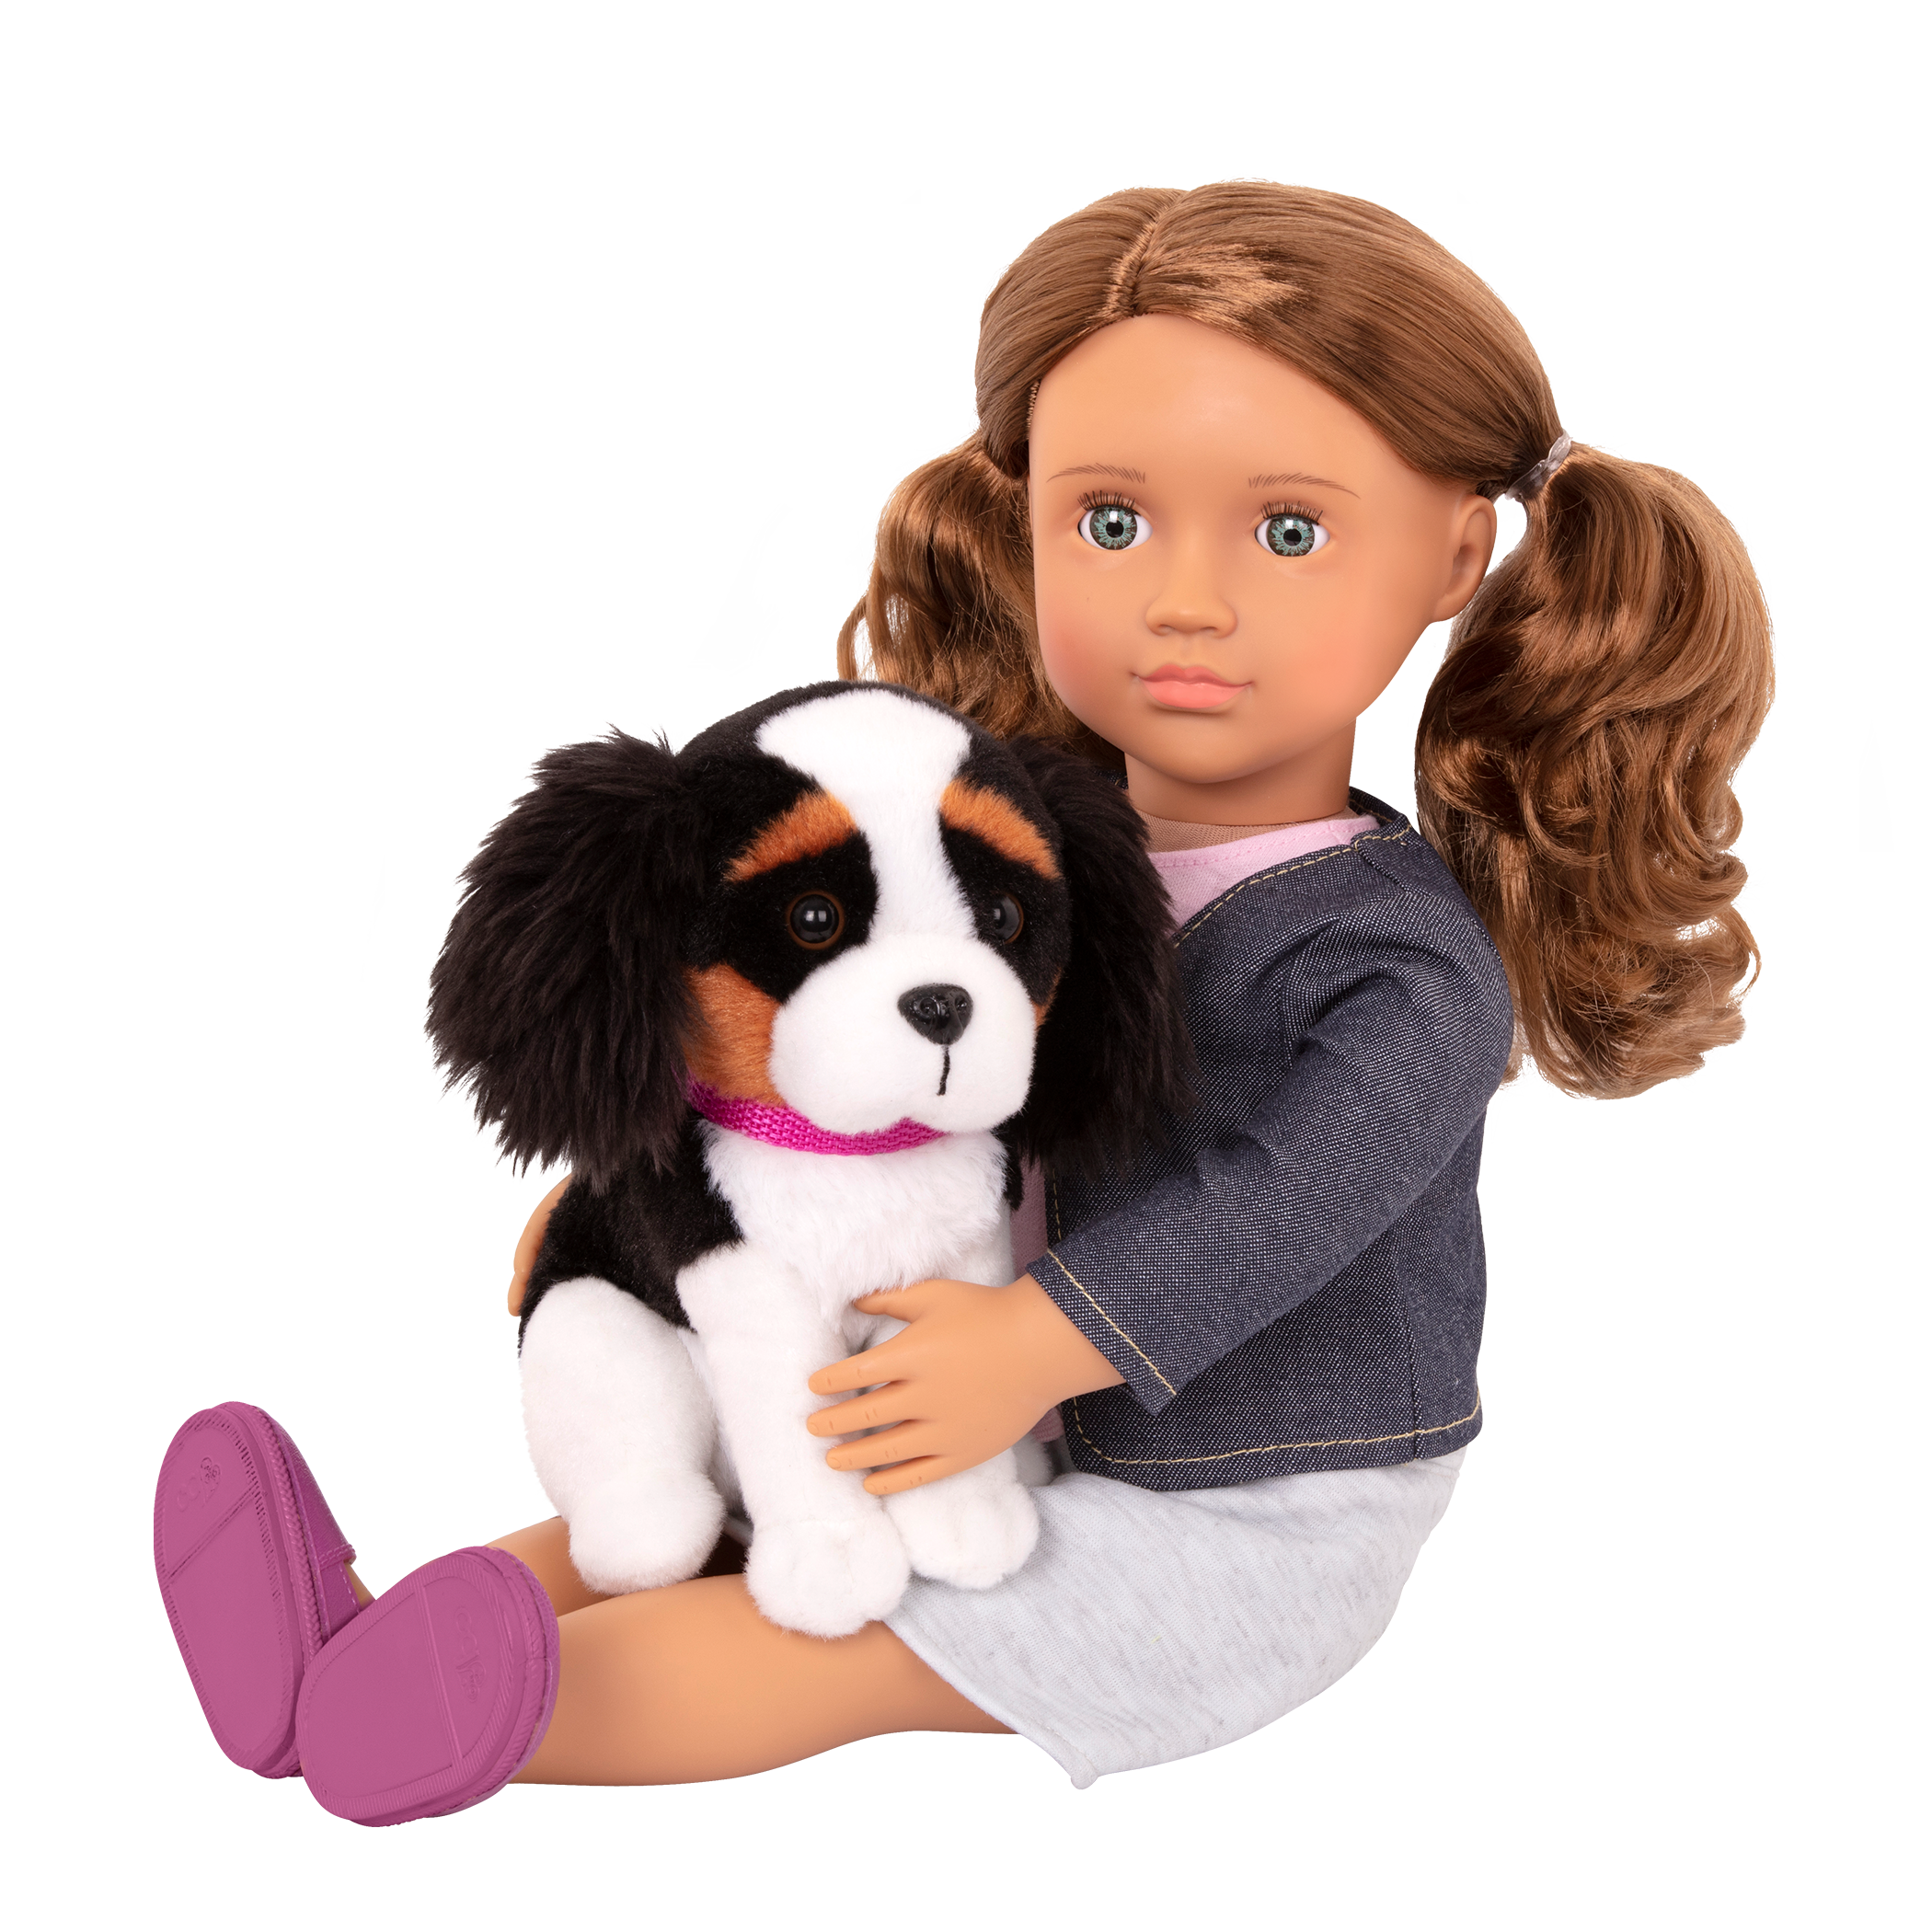 18-inch doll with brown hair, turquoise eyes, travel accessories and Bernese mountain dog plushie